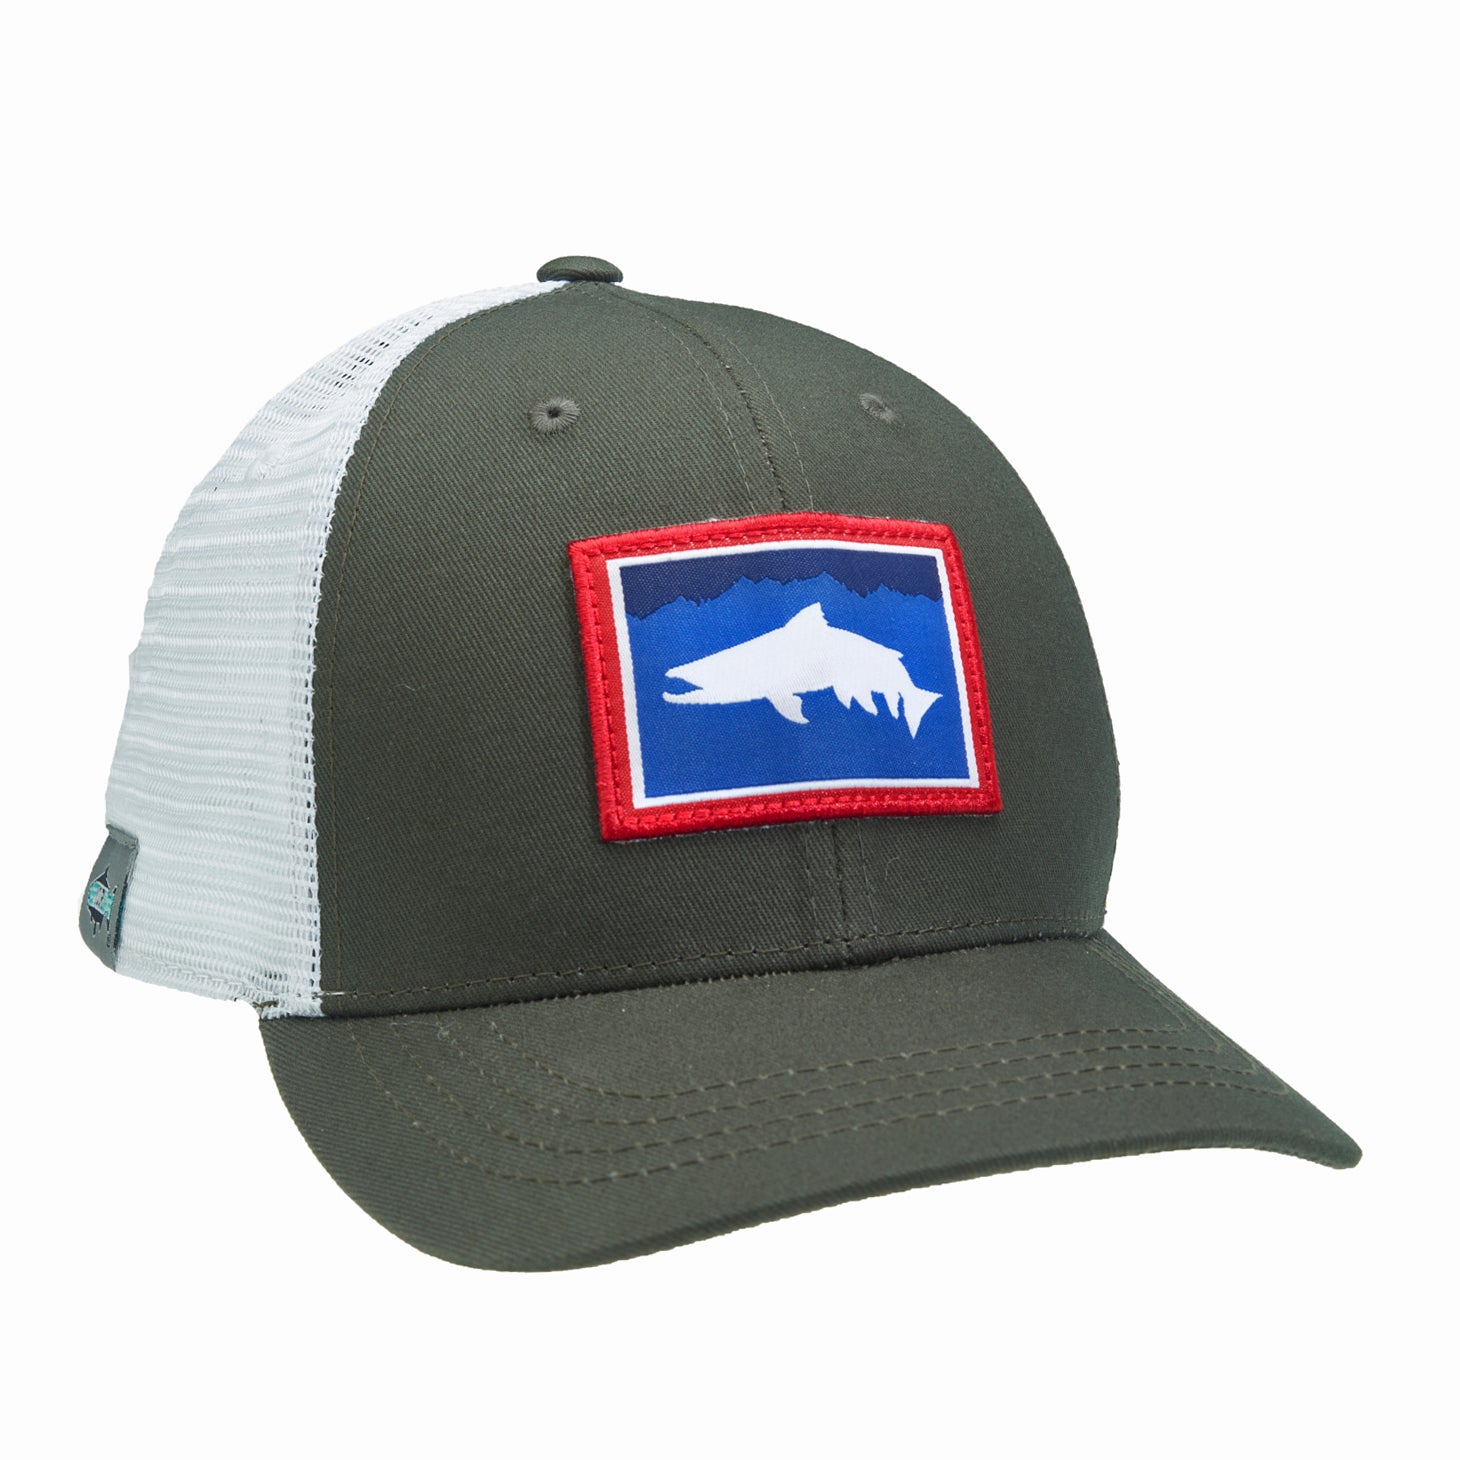 A hat with white mesh and green fabric has a rectangular patch with a trout inside the colors of the wyoming flag